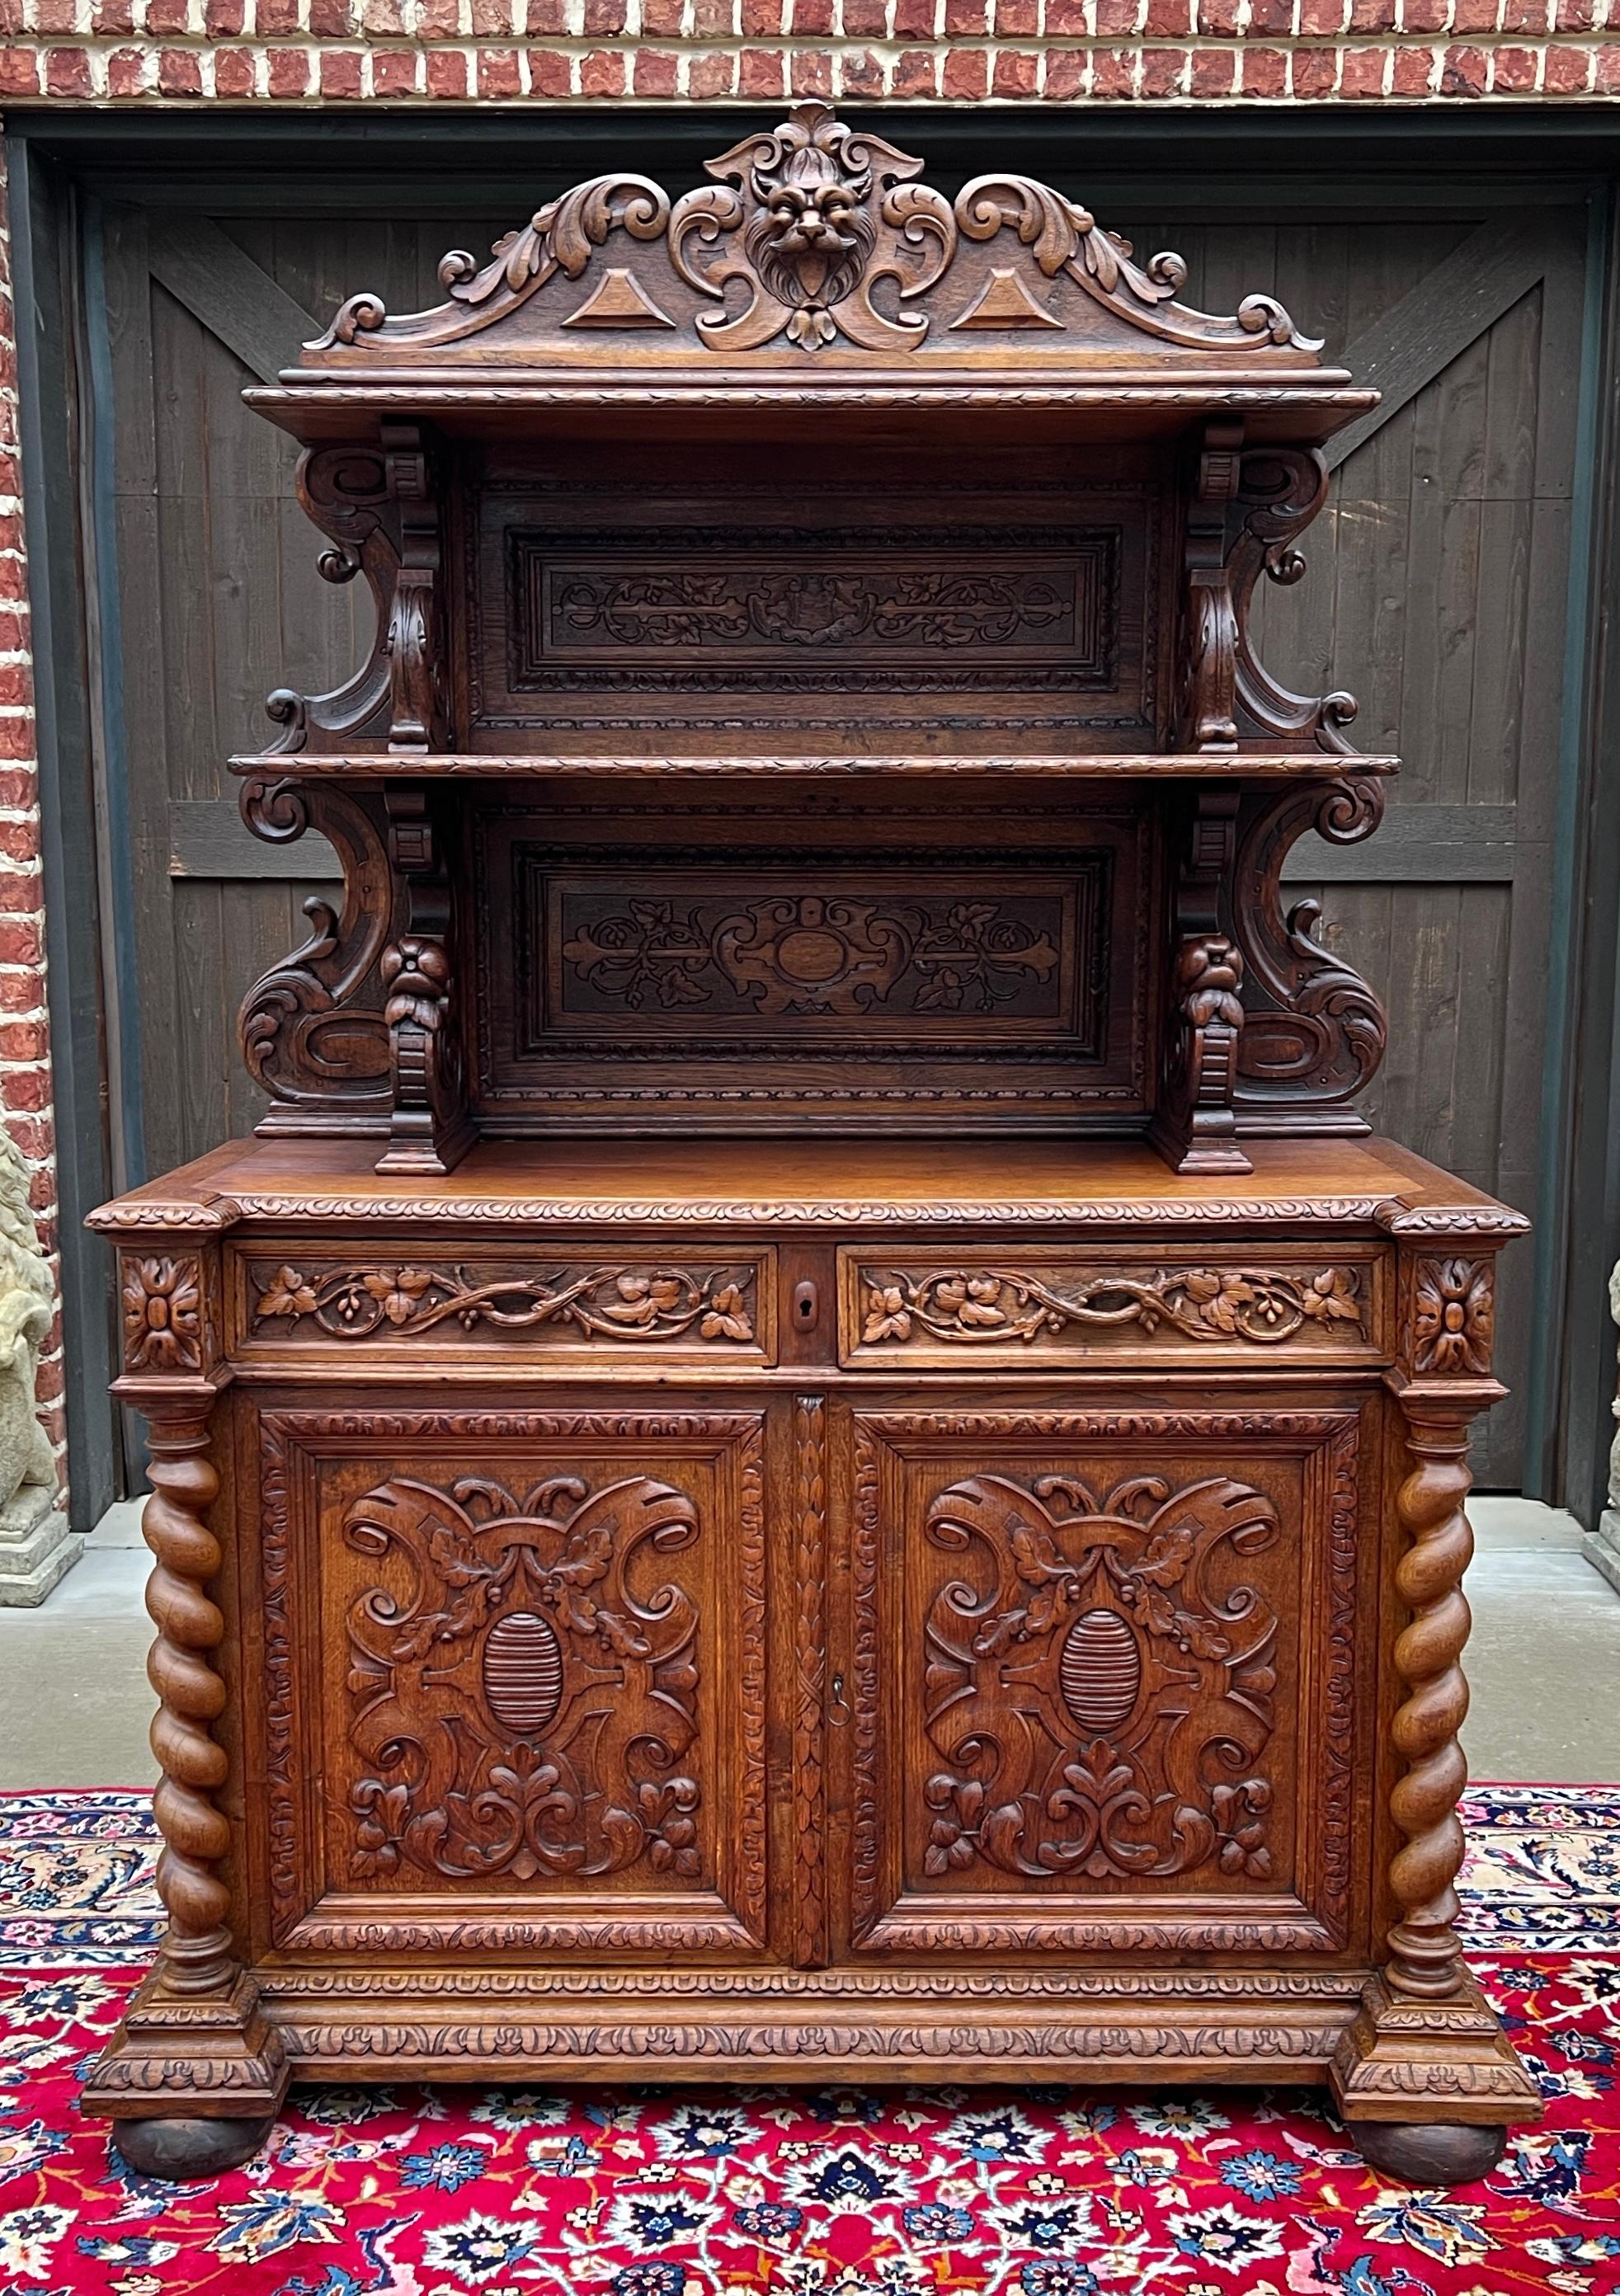 SUPERB 19th Century Antique French Honey Oak 3-Tier Server Sideboard Buffet Cabinet Bookcase~~
c. 1870s 

This is only one of multiple exquisite pieces recently received from our European shipper~~wonderful hand-carved oak pieces in the highly